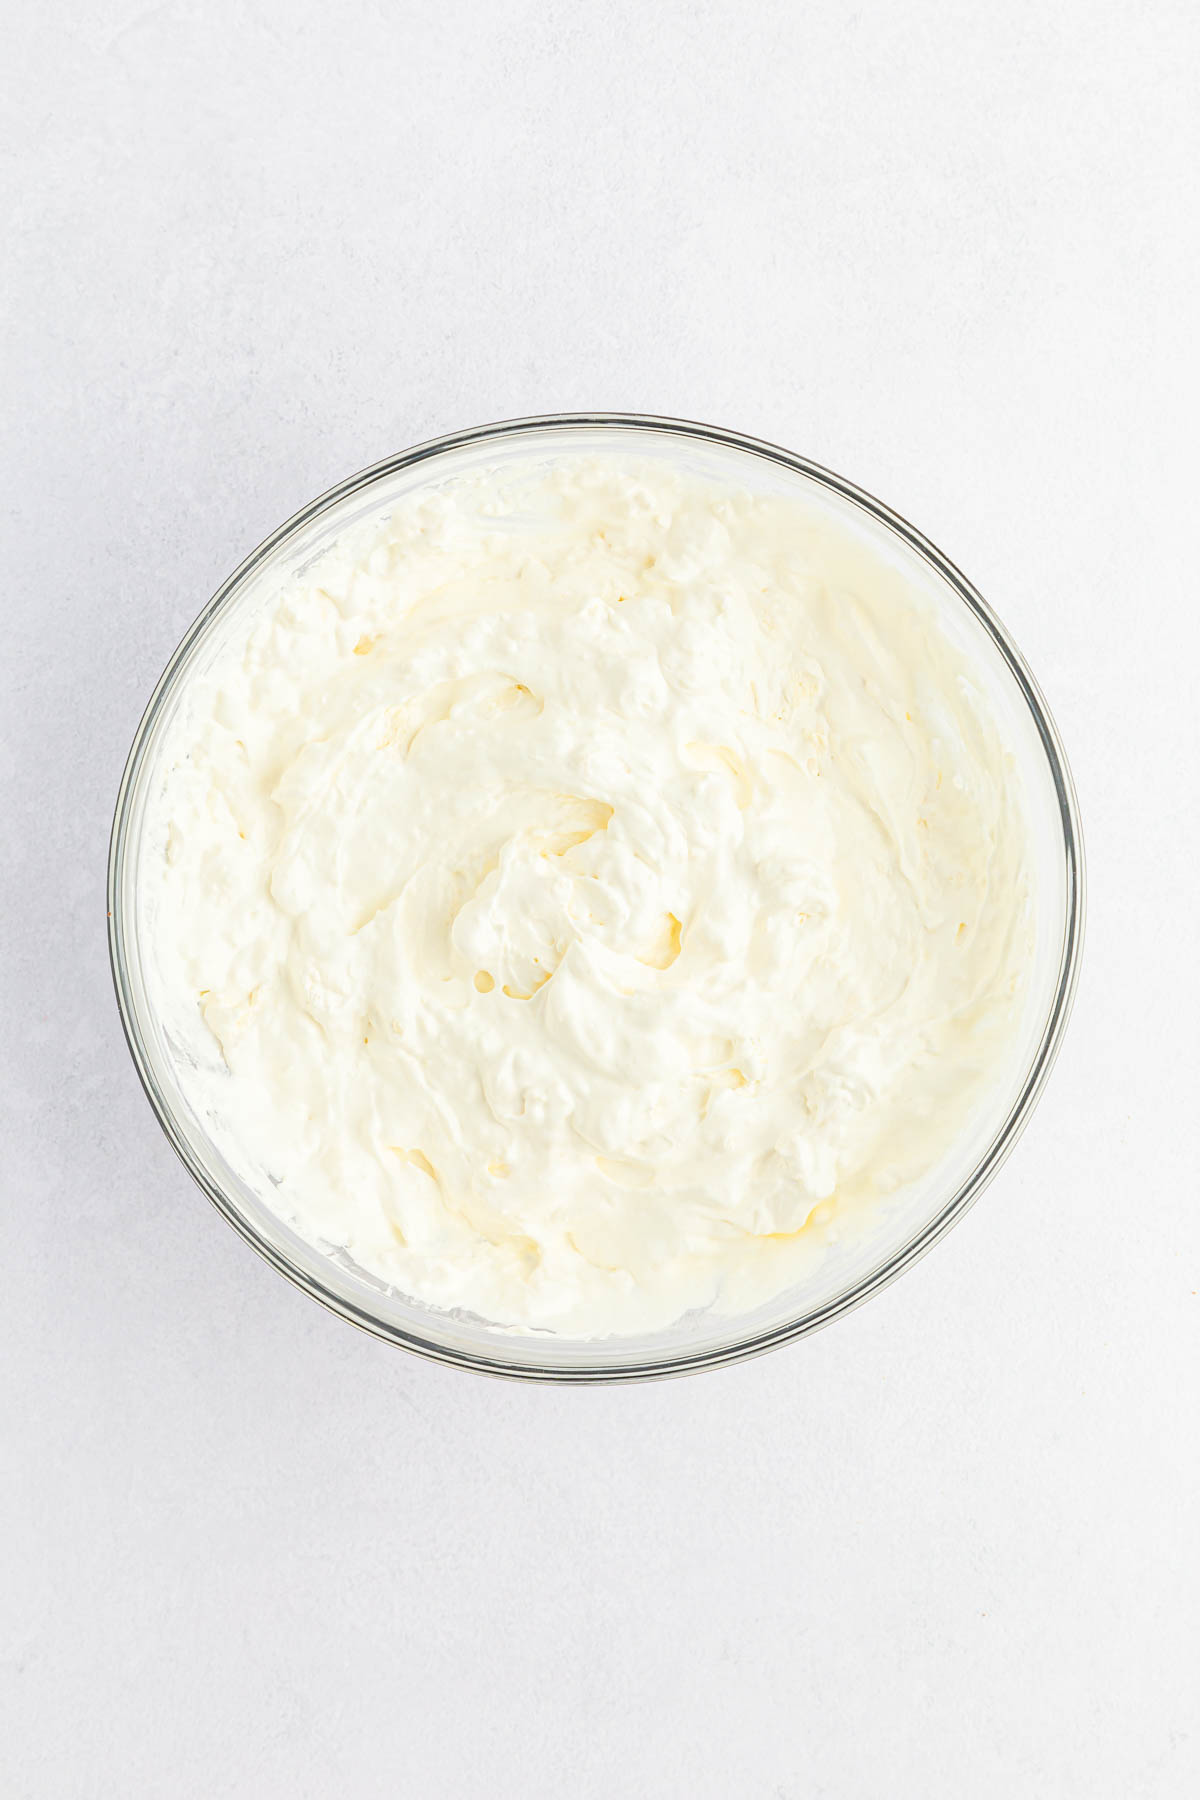 Cream cheese mixture and Cool Whip blended